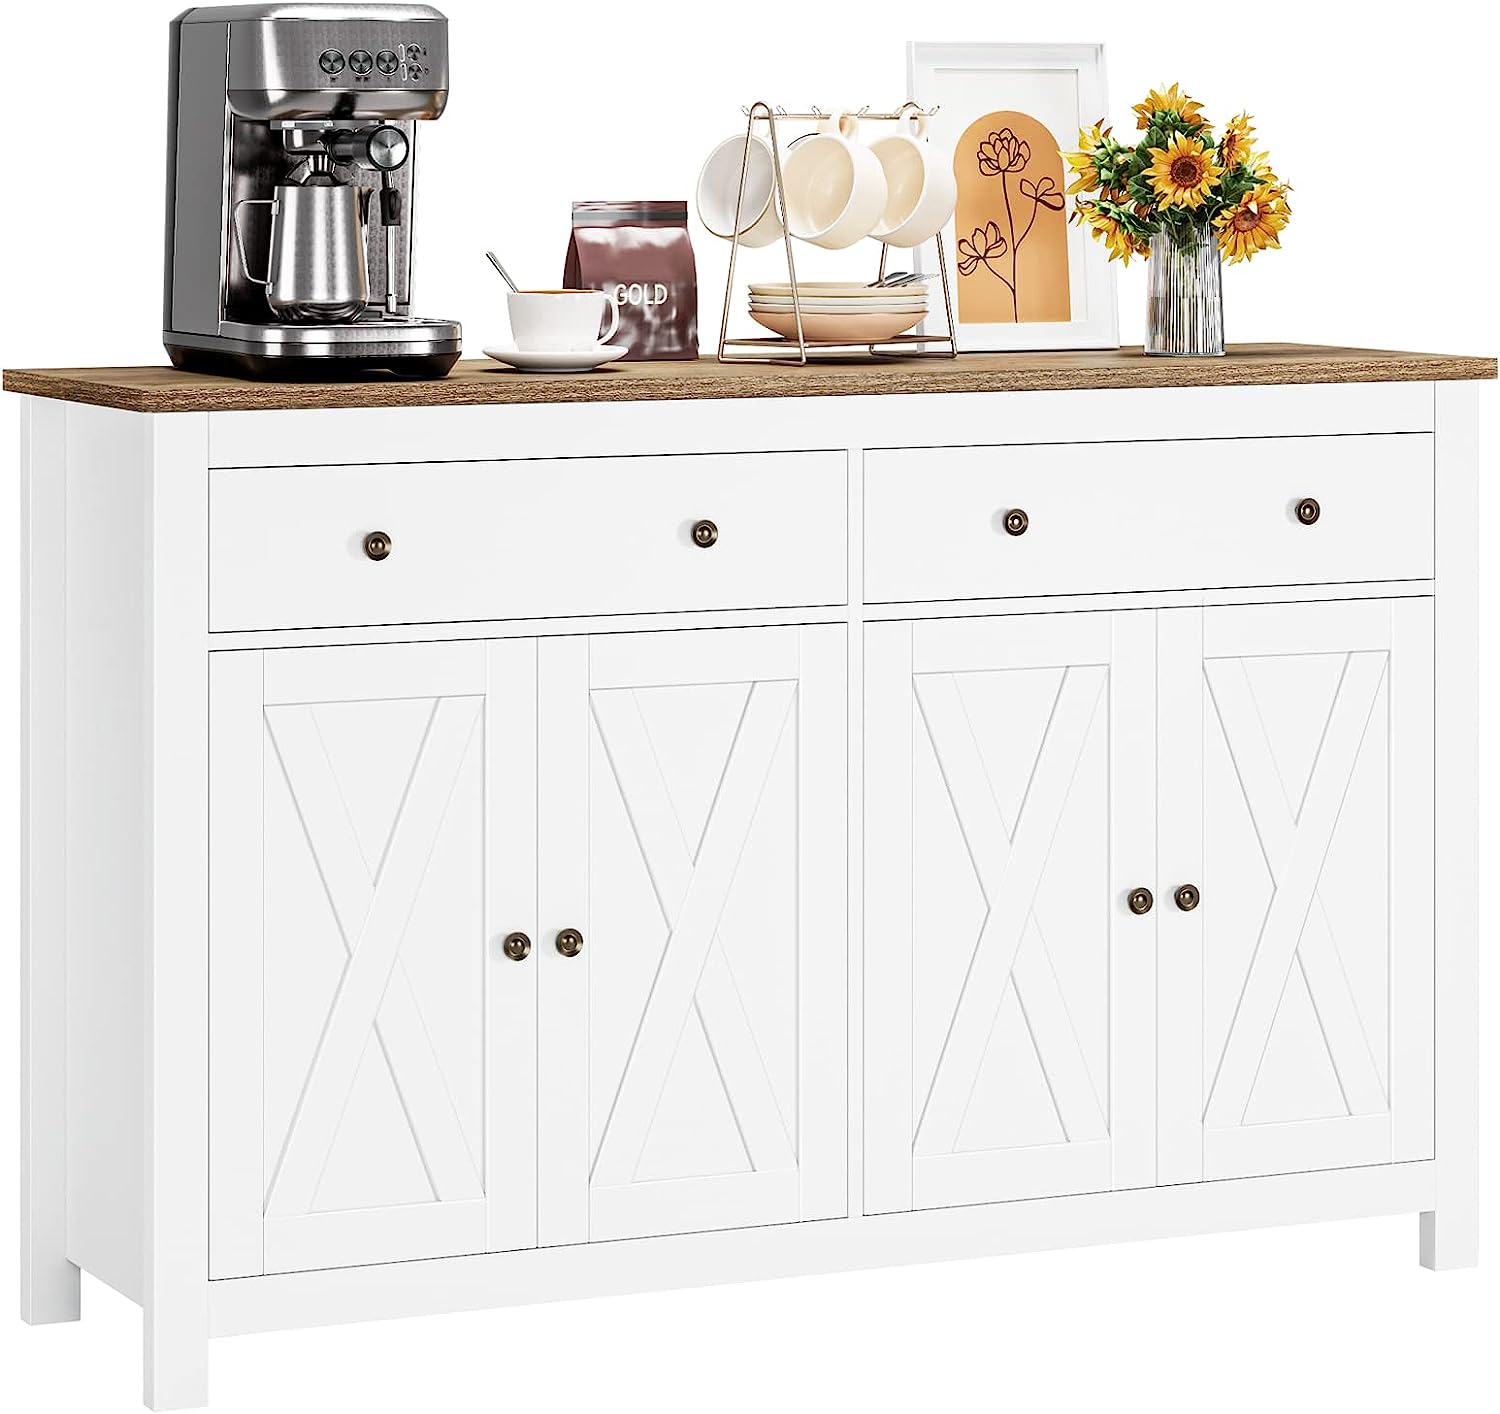 FOTOSOK Sideboard Buffet Cabinet with Storage, 55